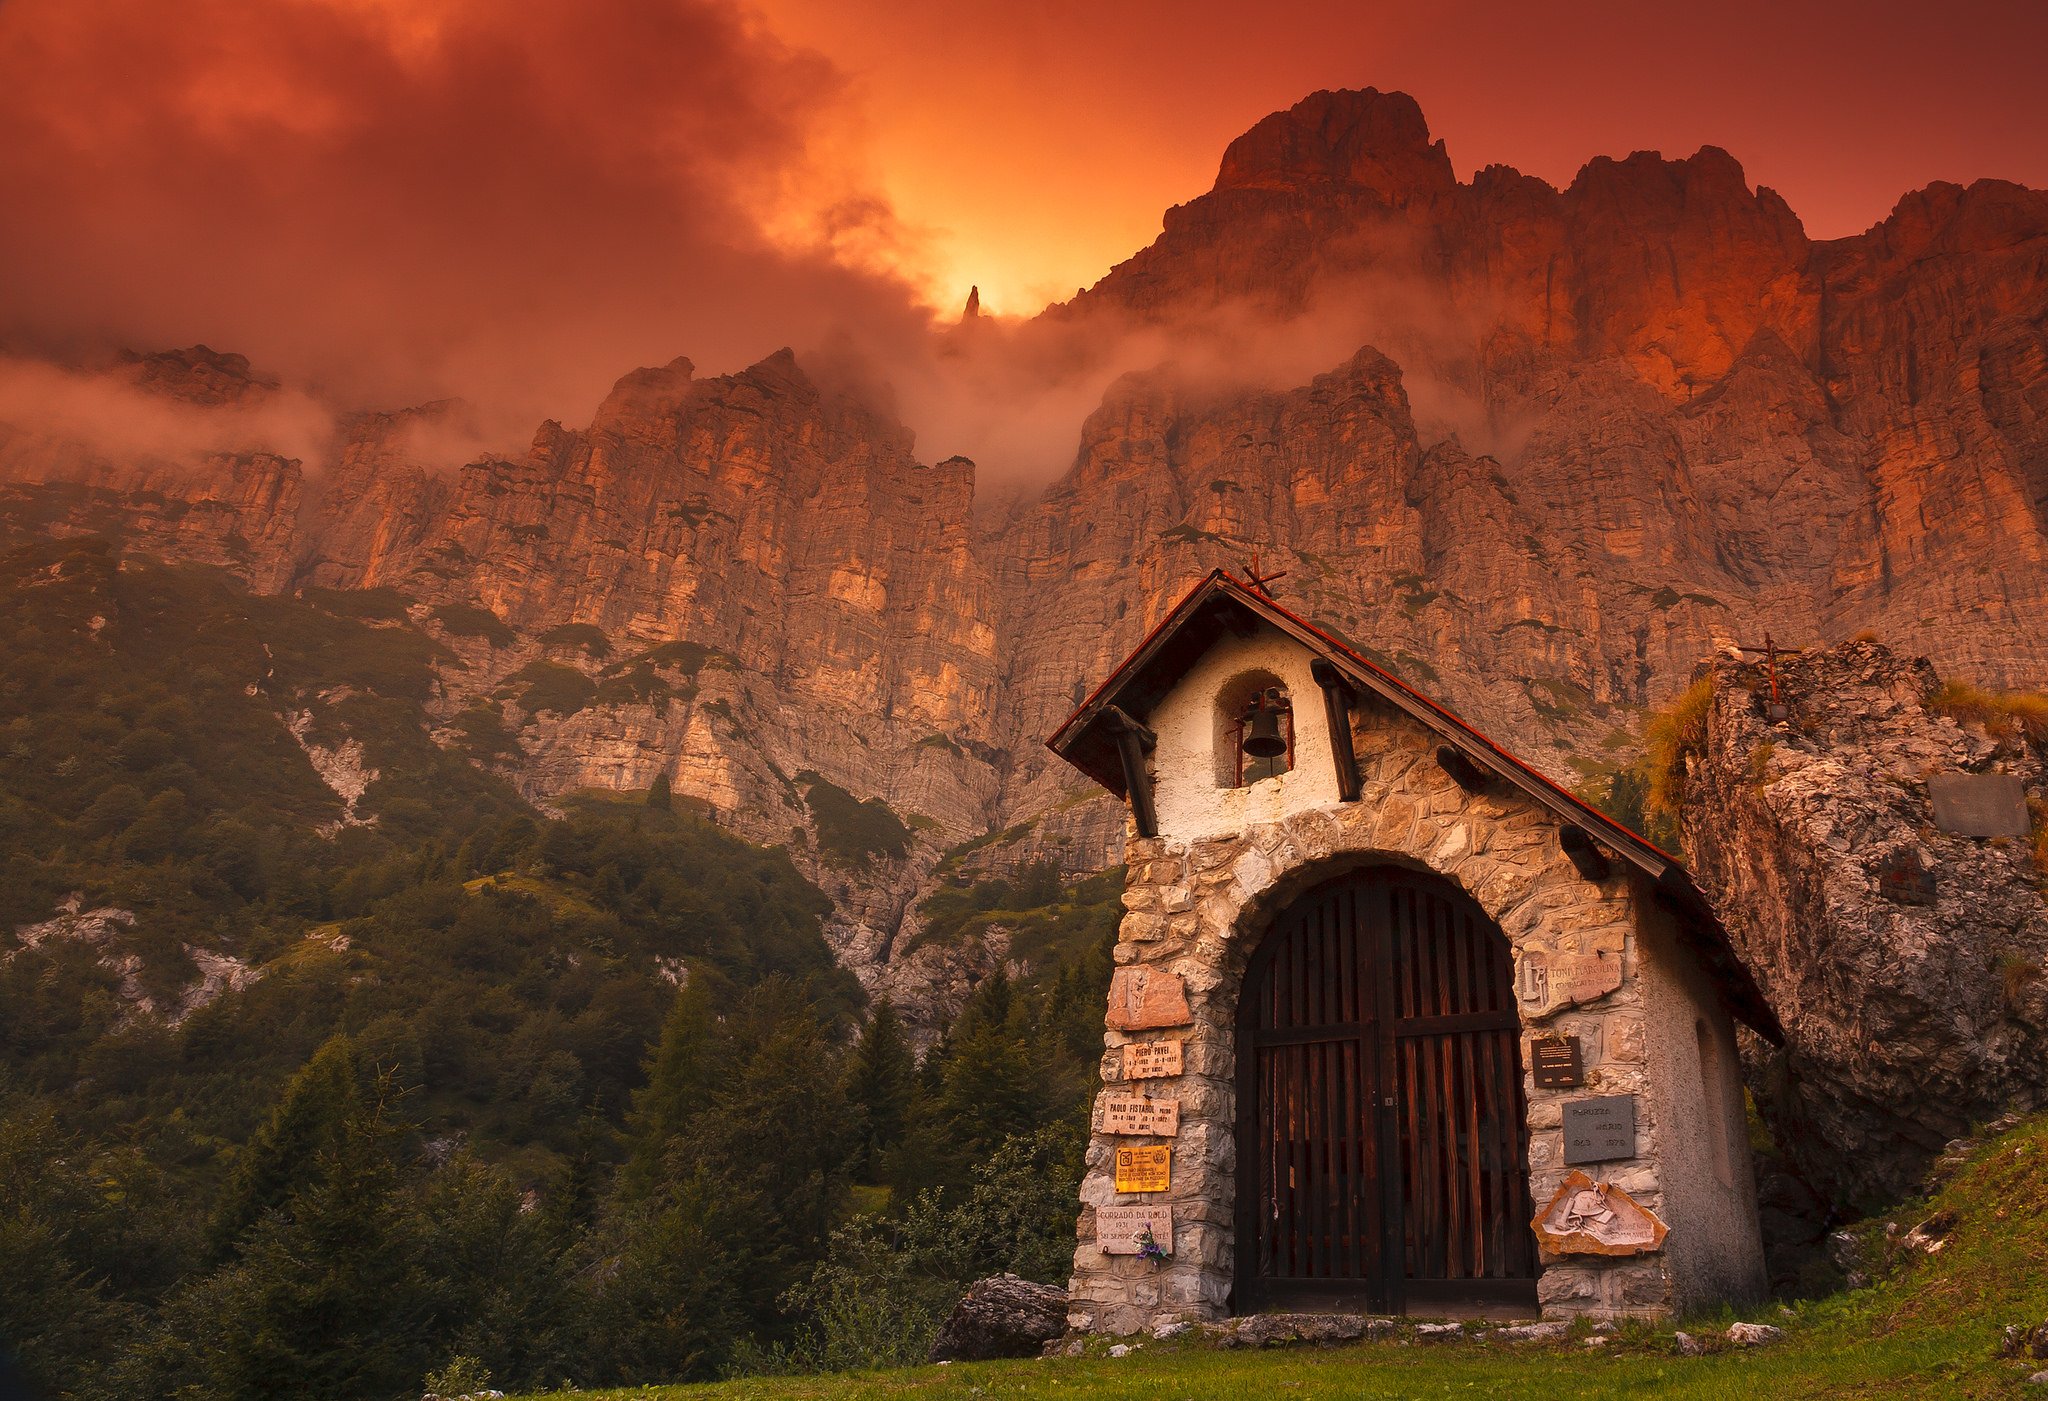 dolomites, religious, chapel, building, cliff, italy, man made, mountain, stone, sunset